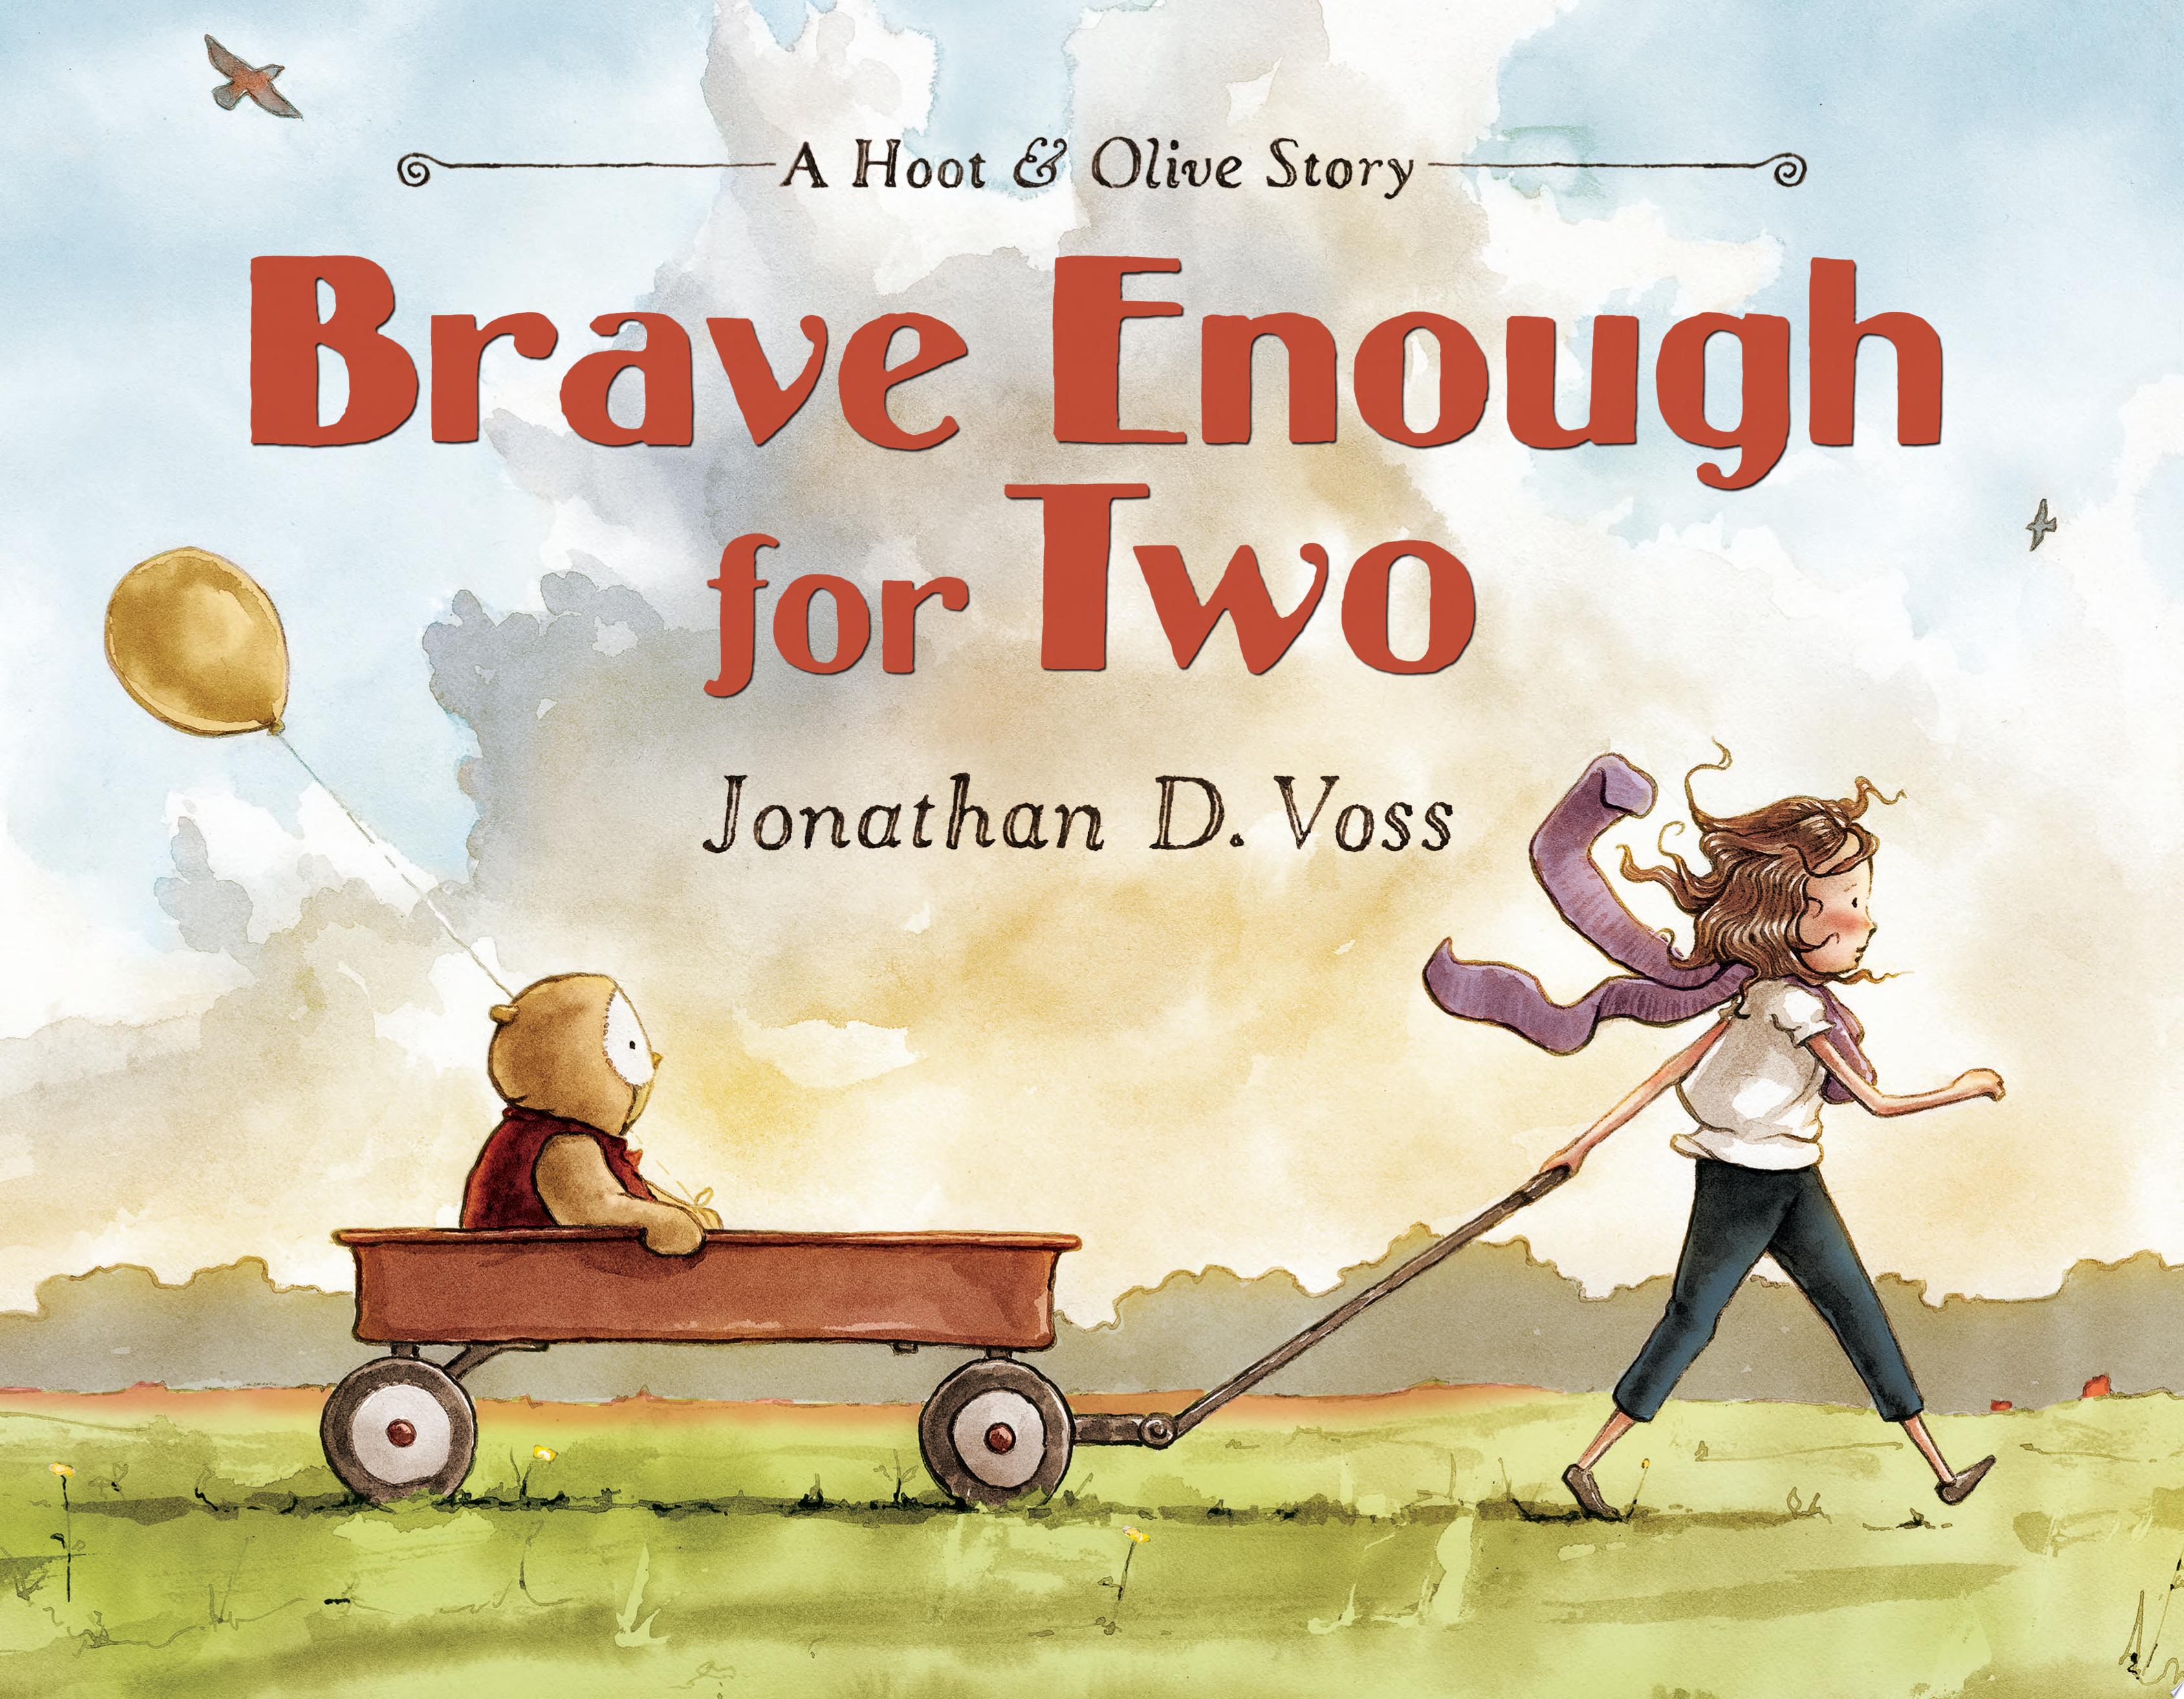 Image for "Brave Enough for Two"